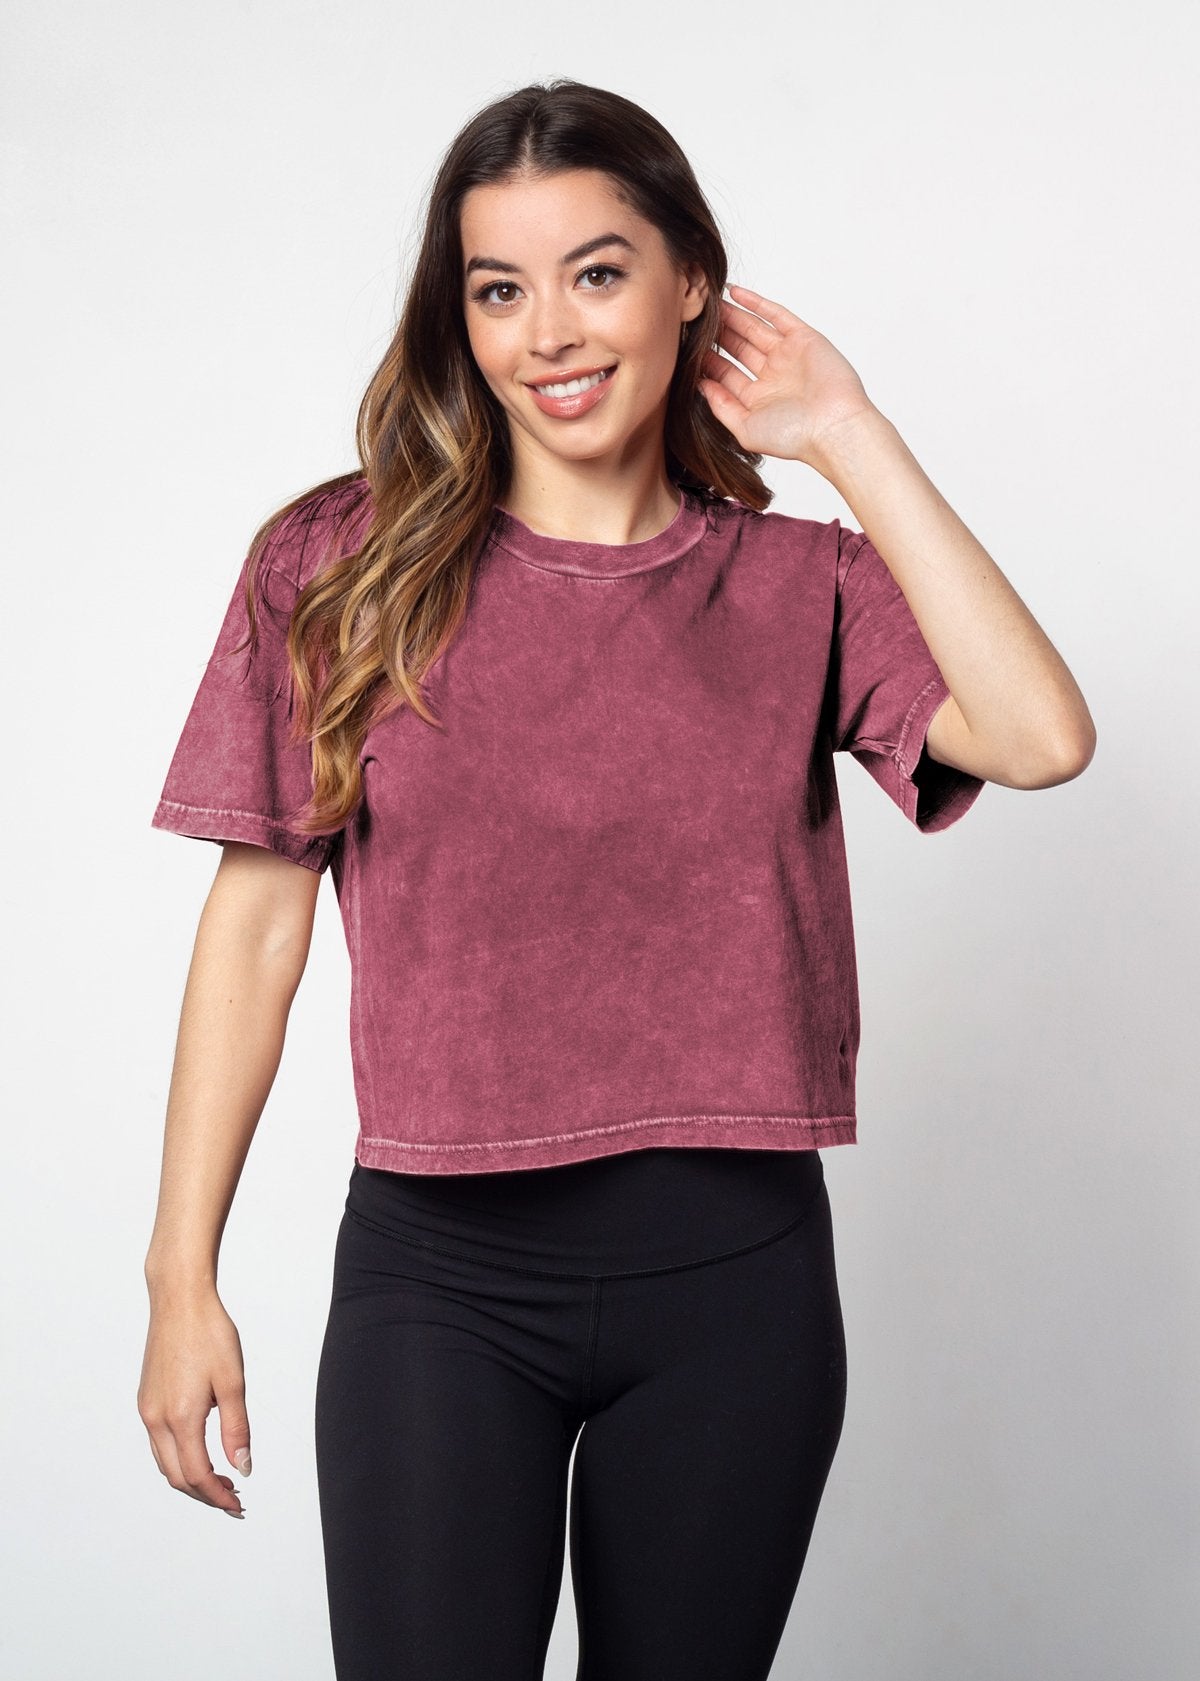 Merlot cropped short sleeve tee in a relaxed boxy silhouette with a vintage inspired wash finish.